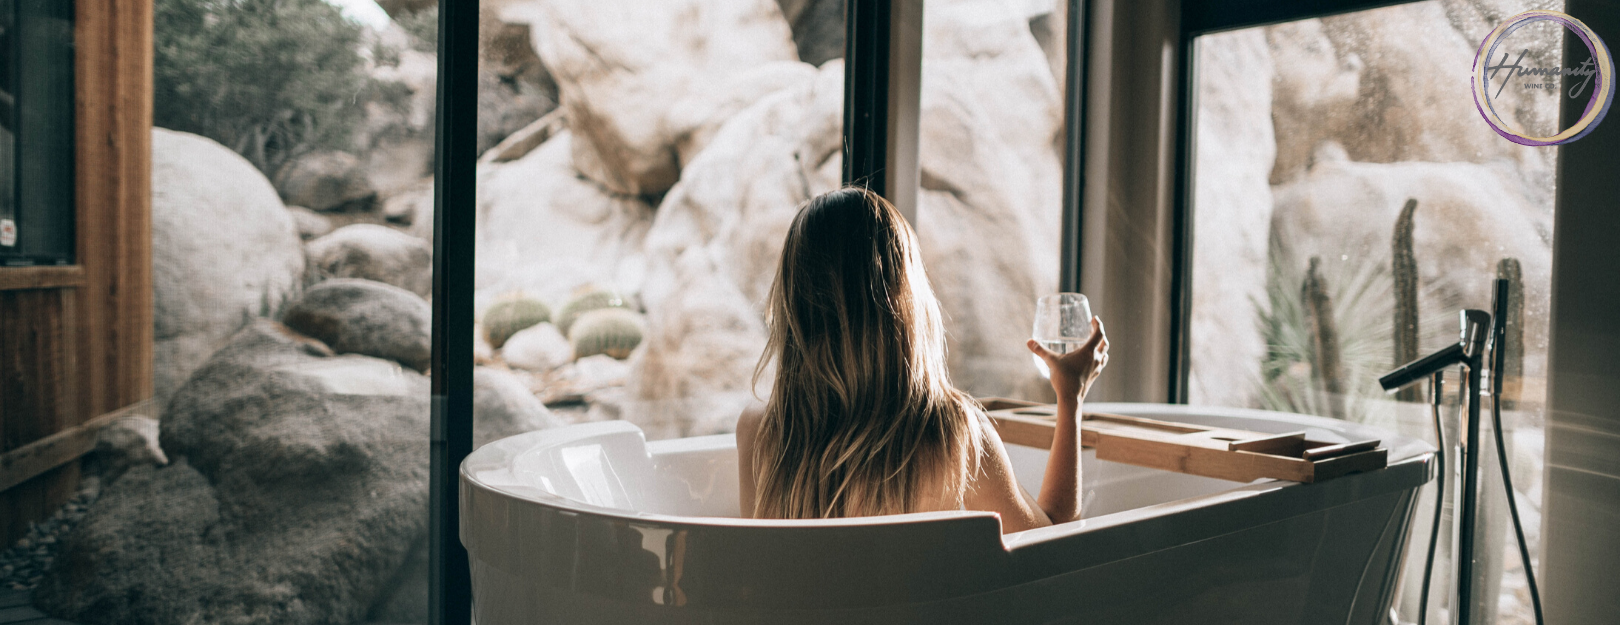 Relax in the bath with a glass of wine